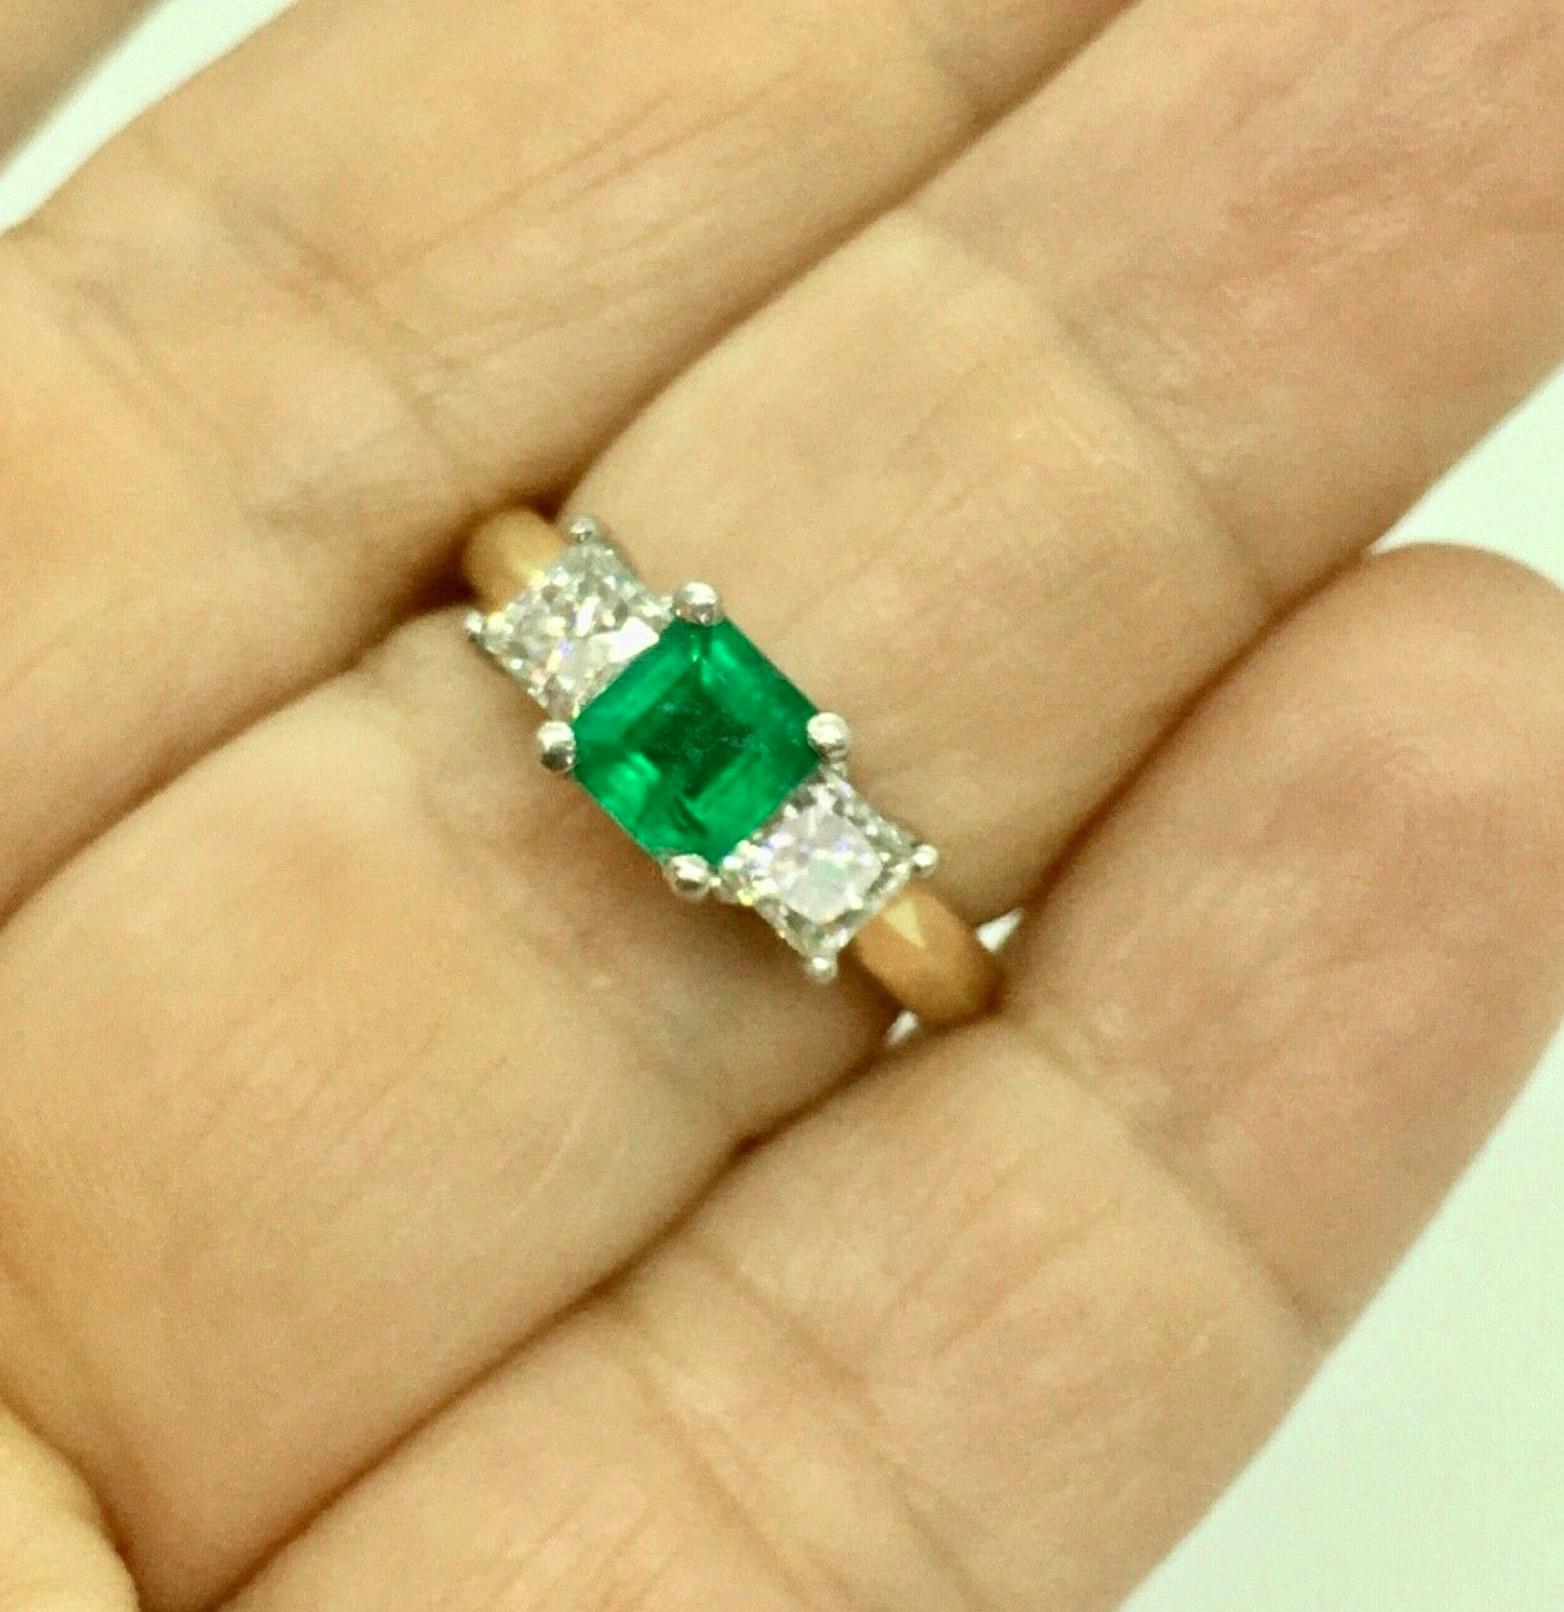 Fine Three Stone 18K Gold and Platinum Engagement Ring 
Center: Fine Natural Colombian Emerald .85 Carat Vivid Medium intense Green
Side: two Natural  princes Cut Diamonds 0.70 Carat SI1-H
Weight   5.8 g
Ring Size 6.5
Estate Piece/Excellent